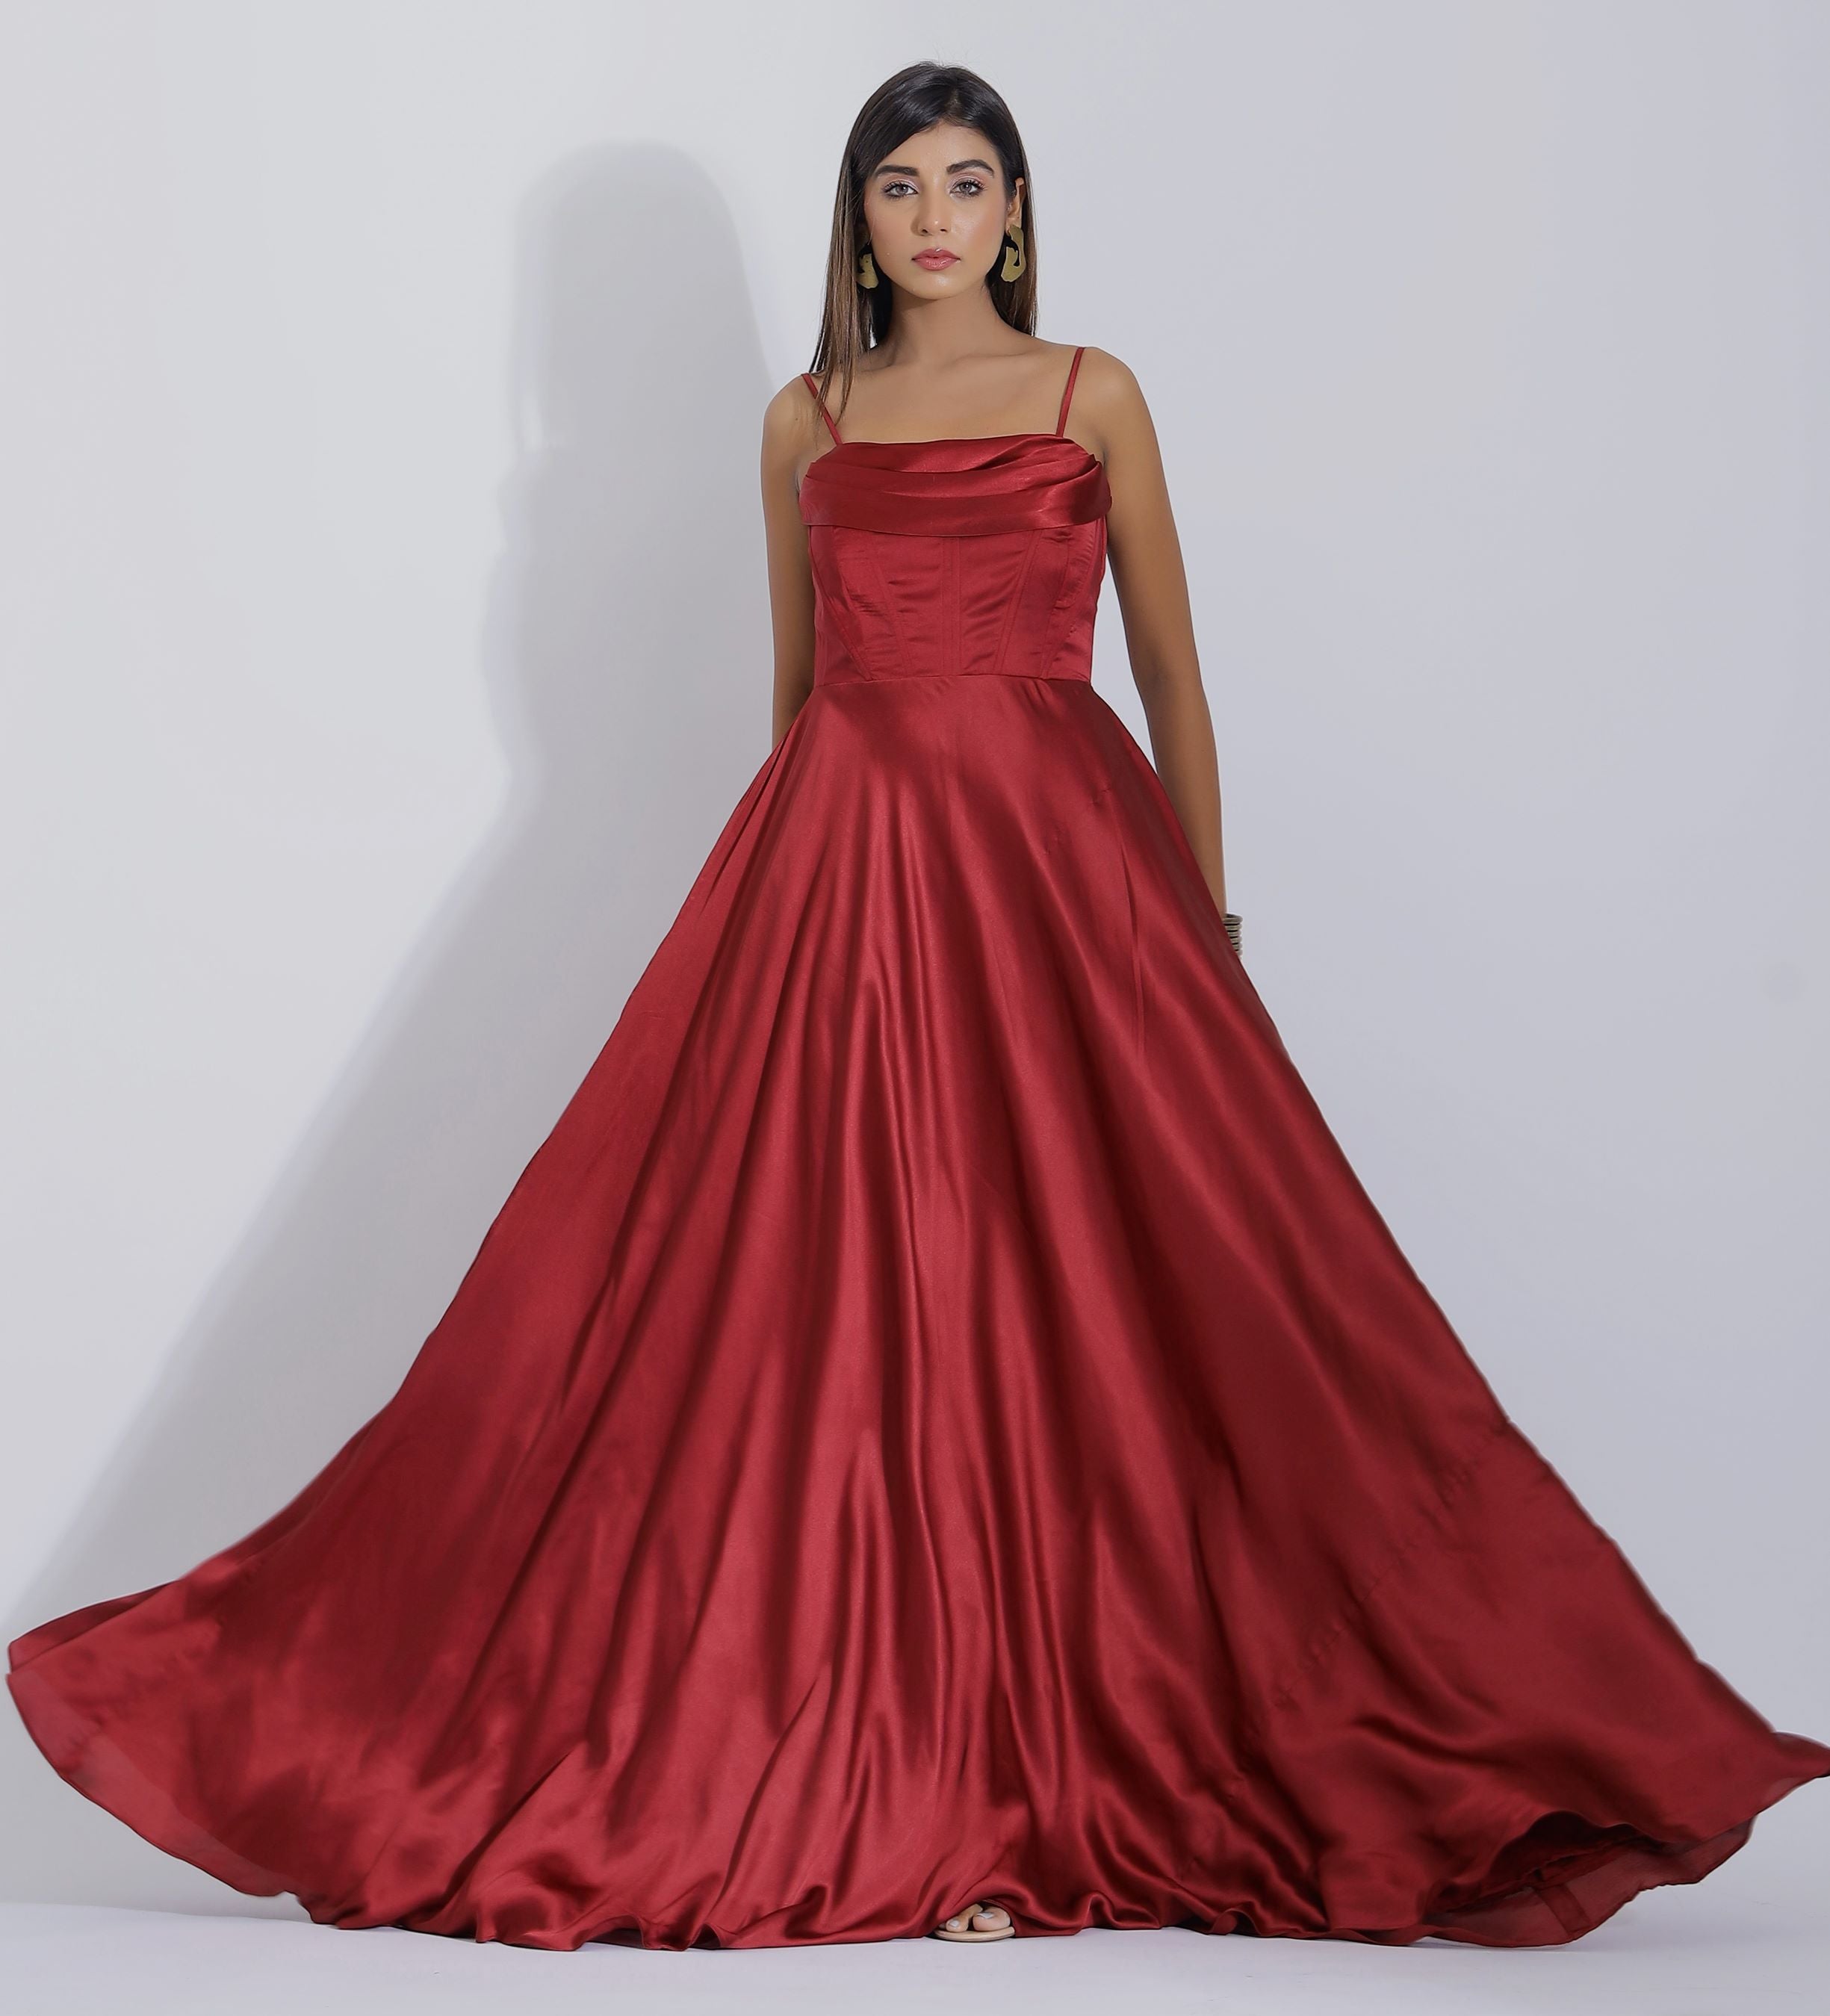 corset dress in maroon color and satin fabric